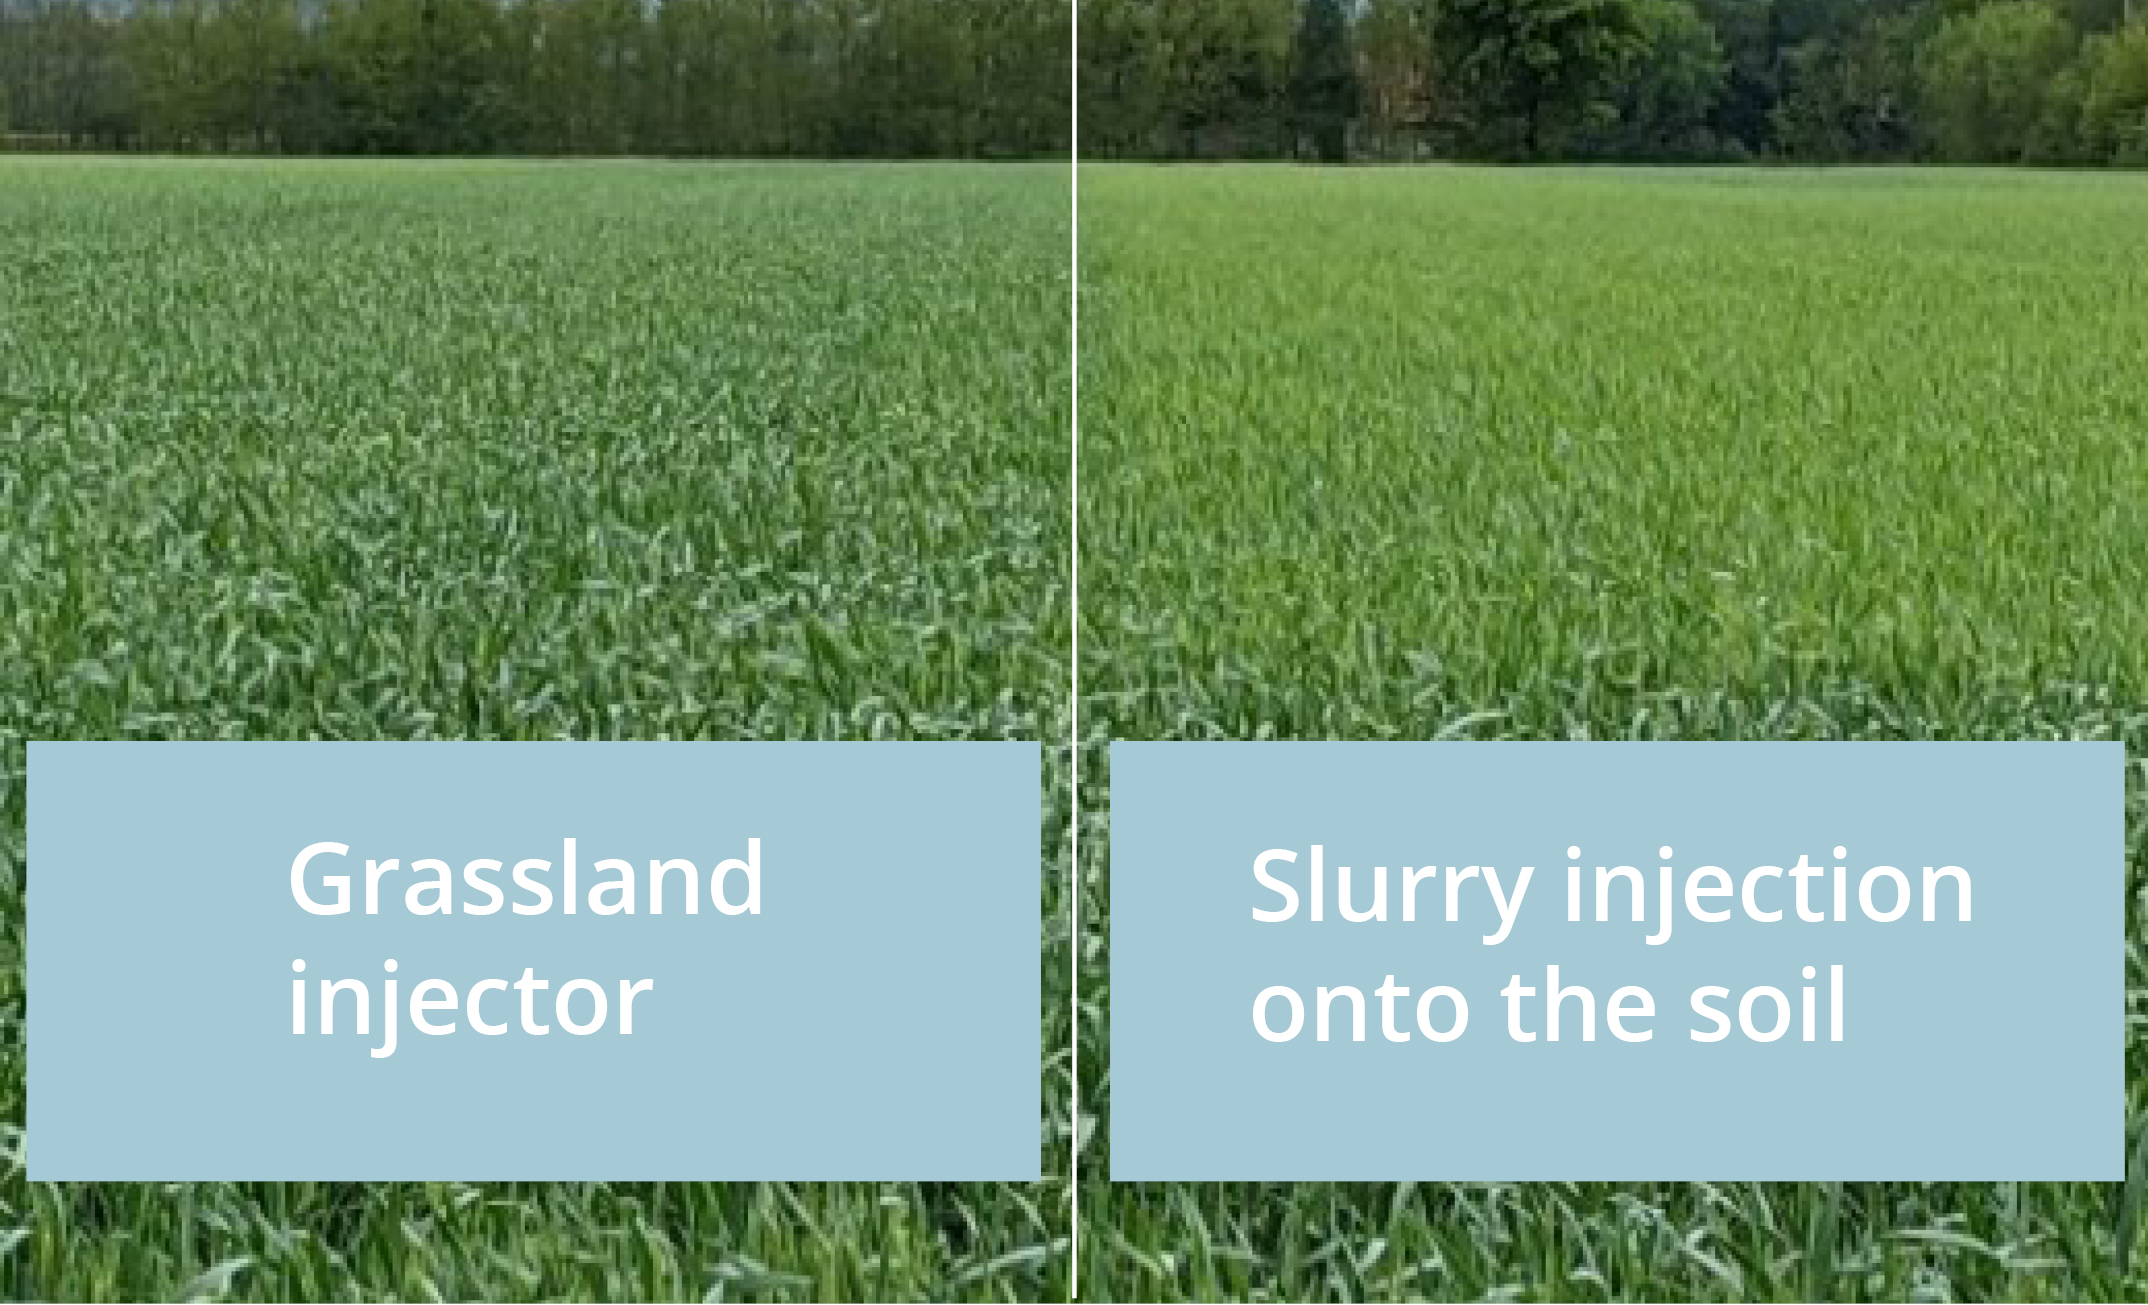 Slurry incorporation, comparison Grassland injector and Slurry injection onto the soil